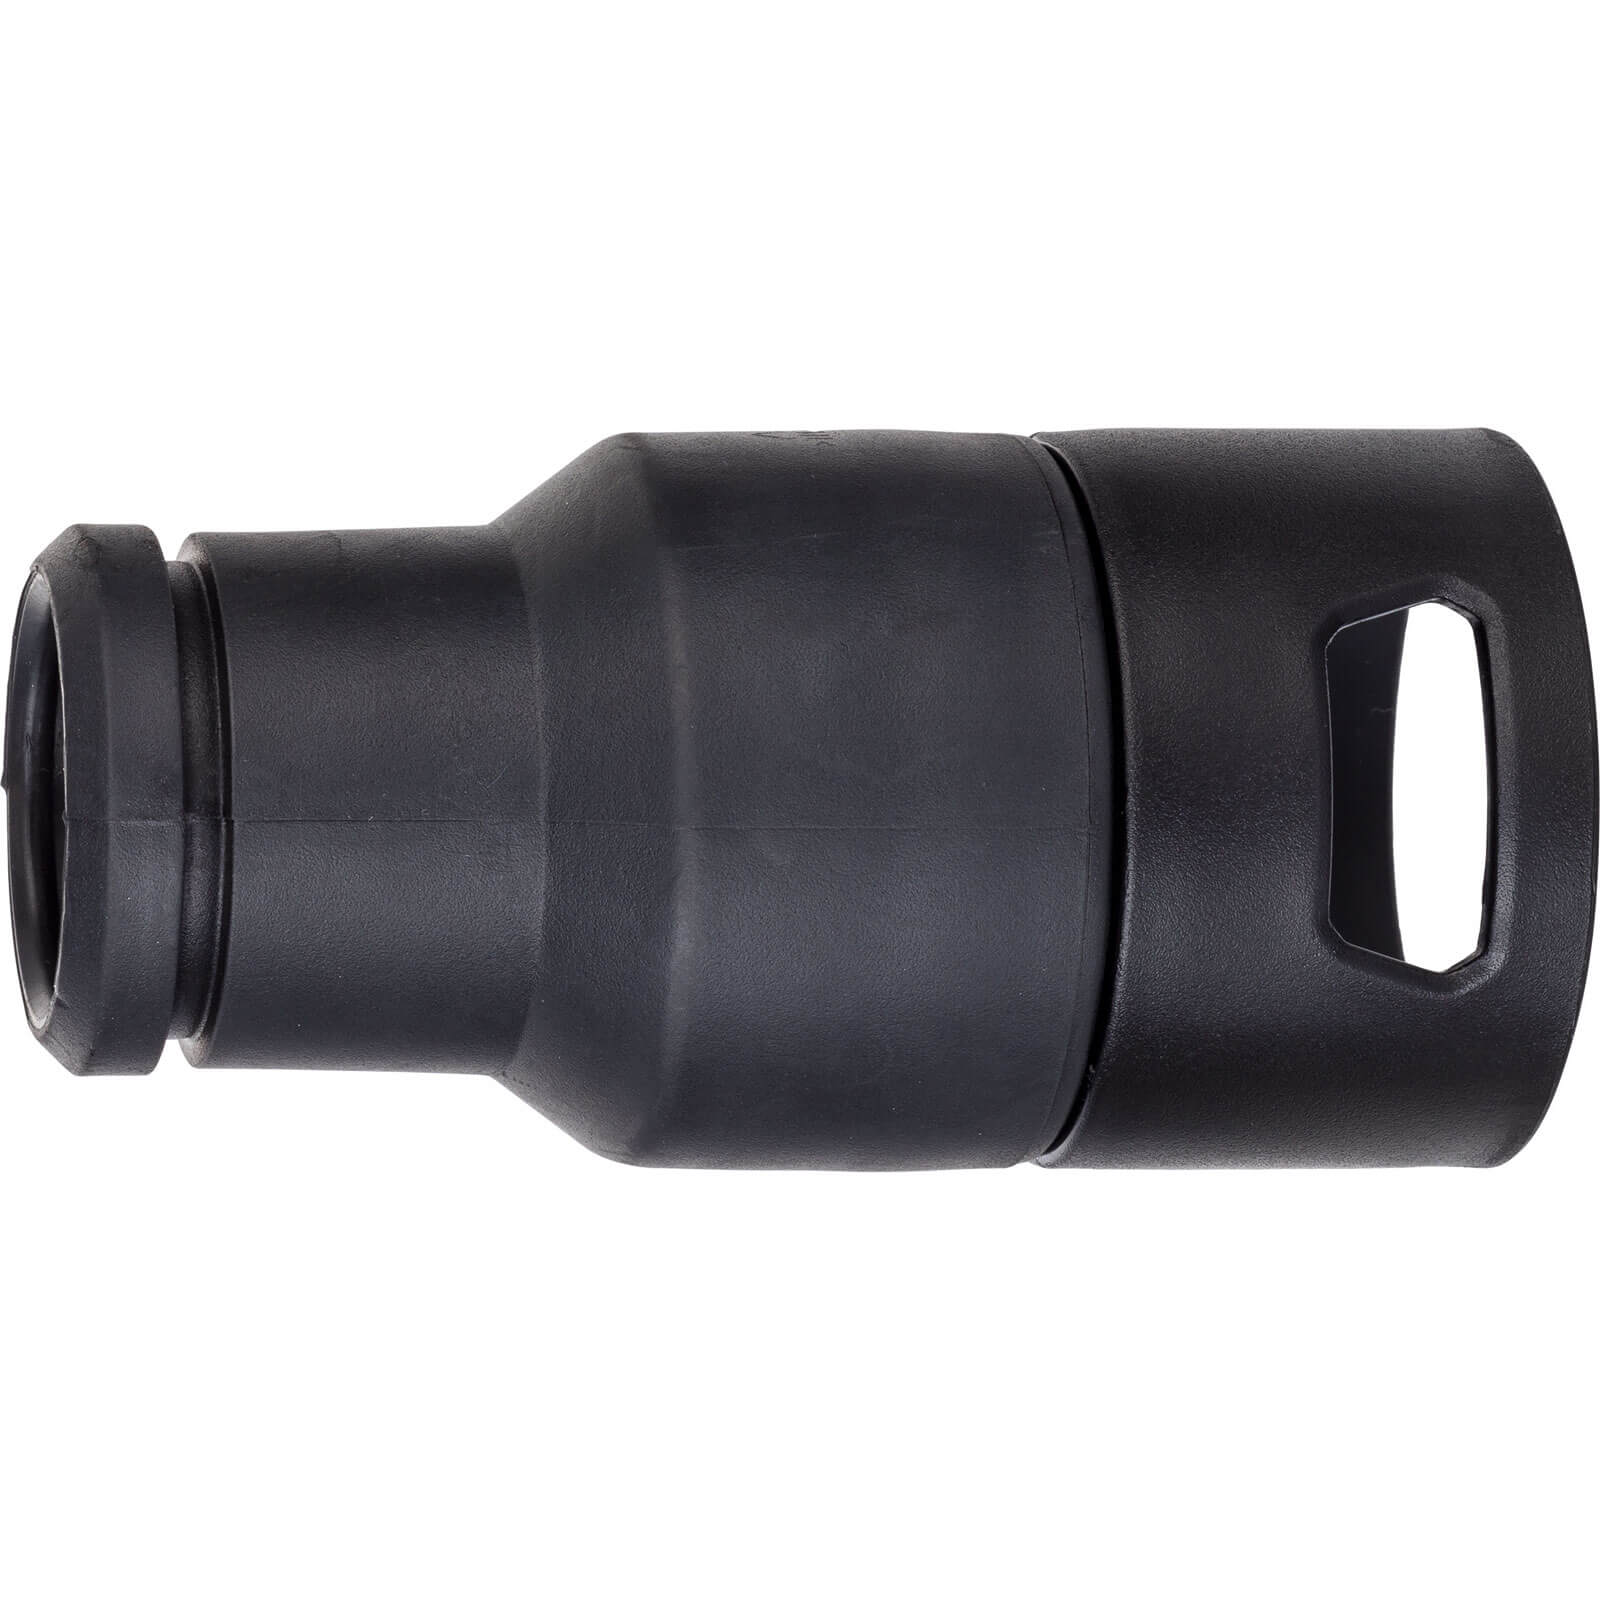 Image of Bosch Universal Adapter for EASYVAC 3 Vacuum Cleaner